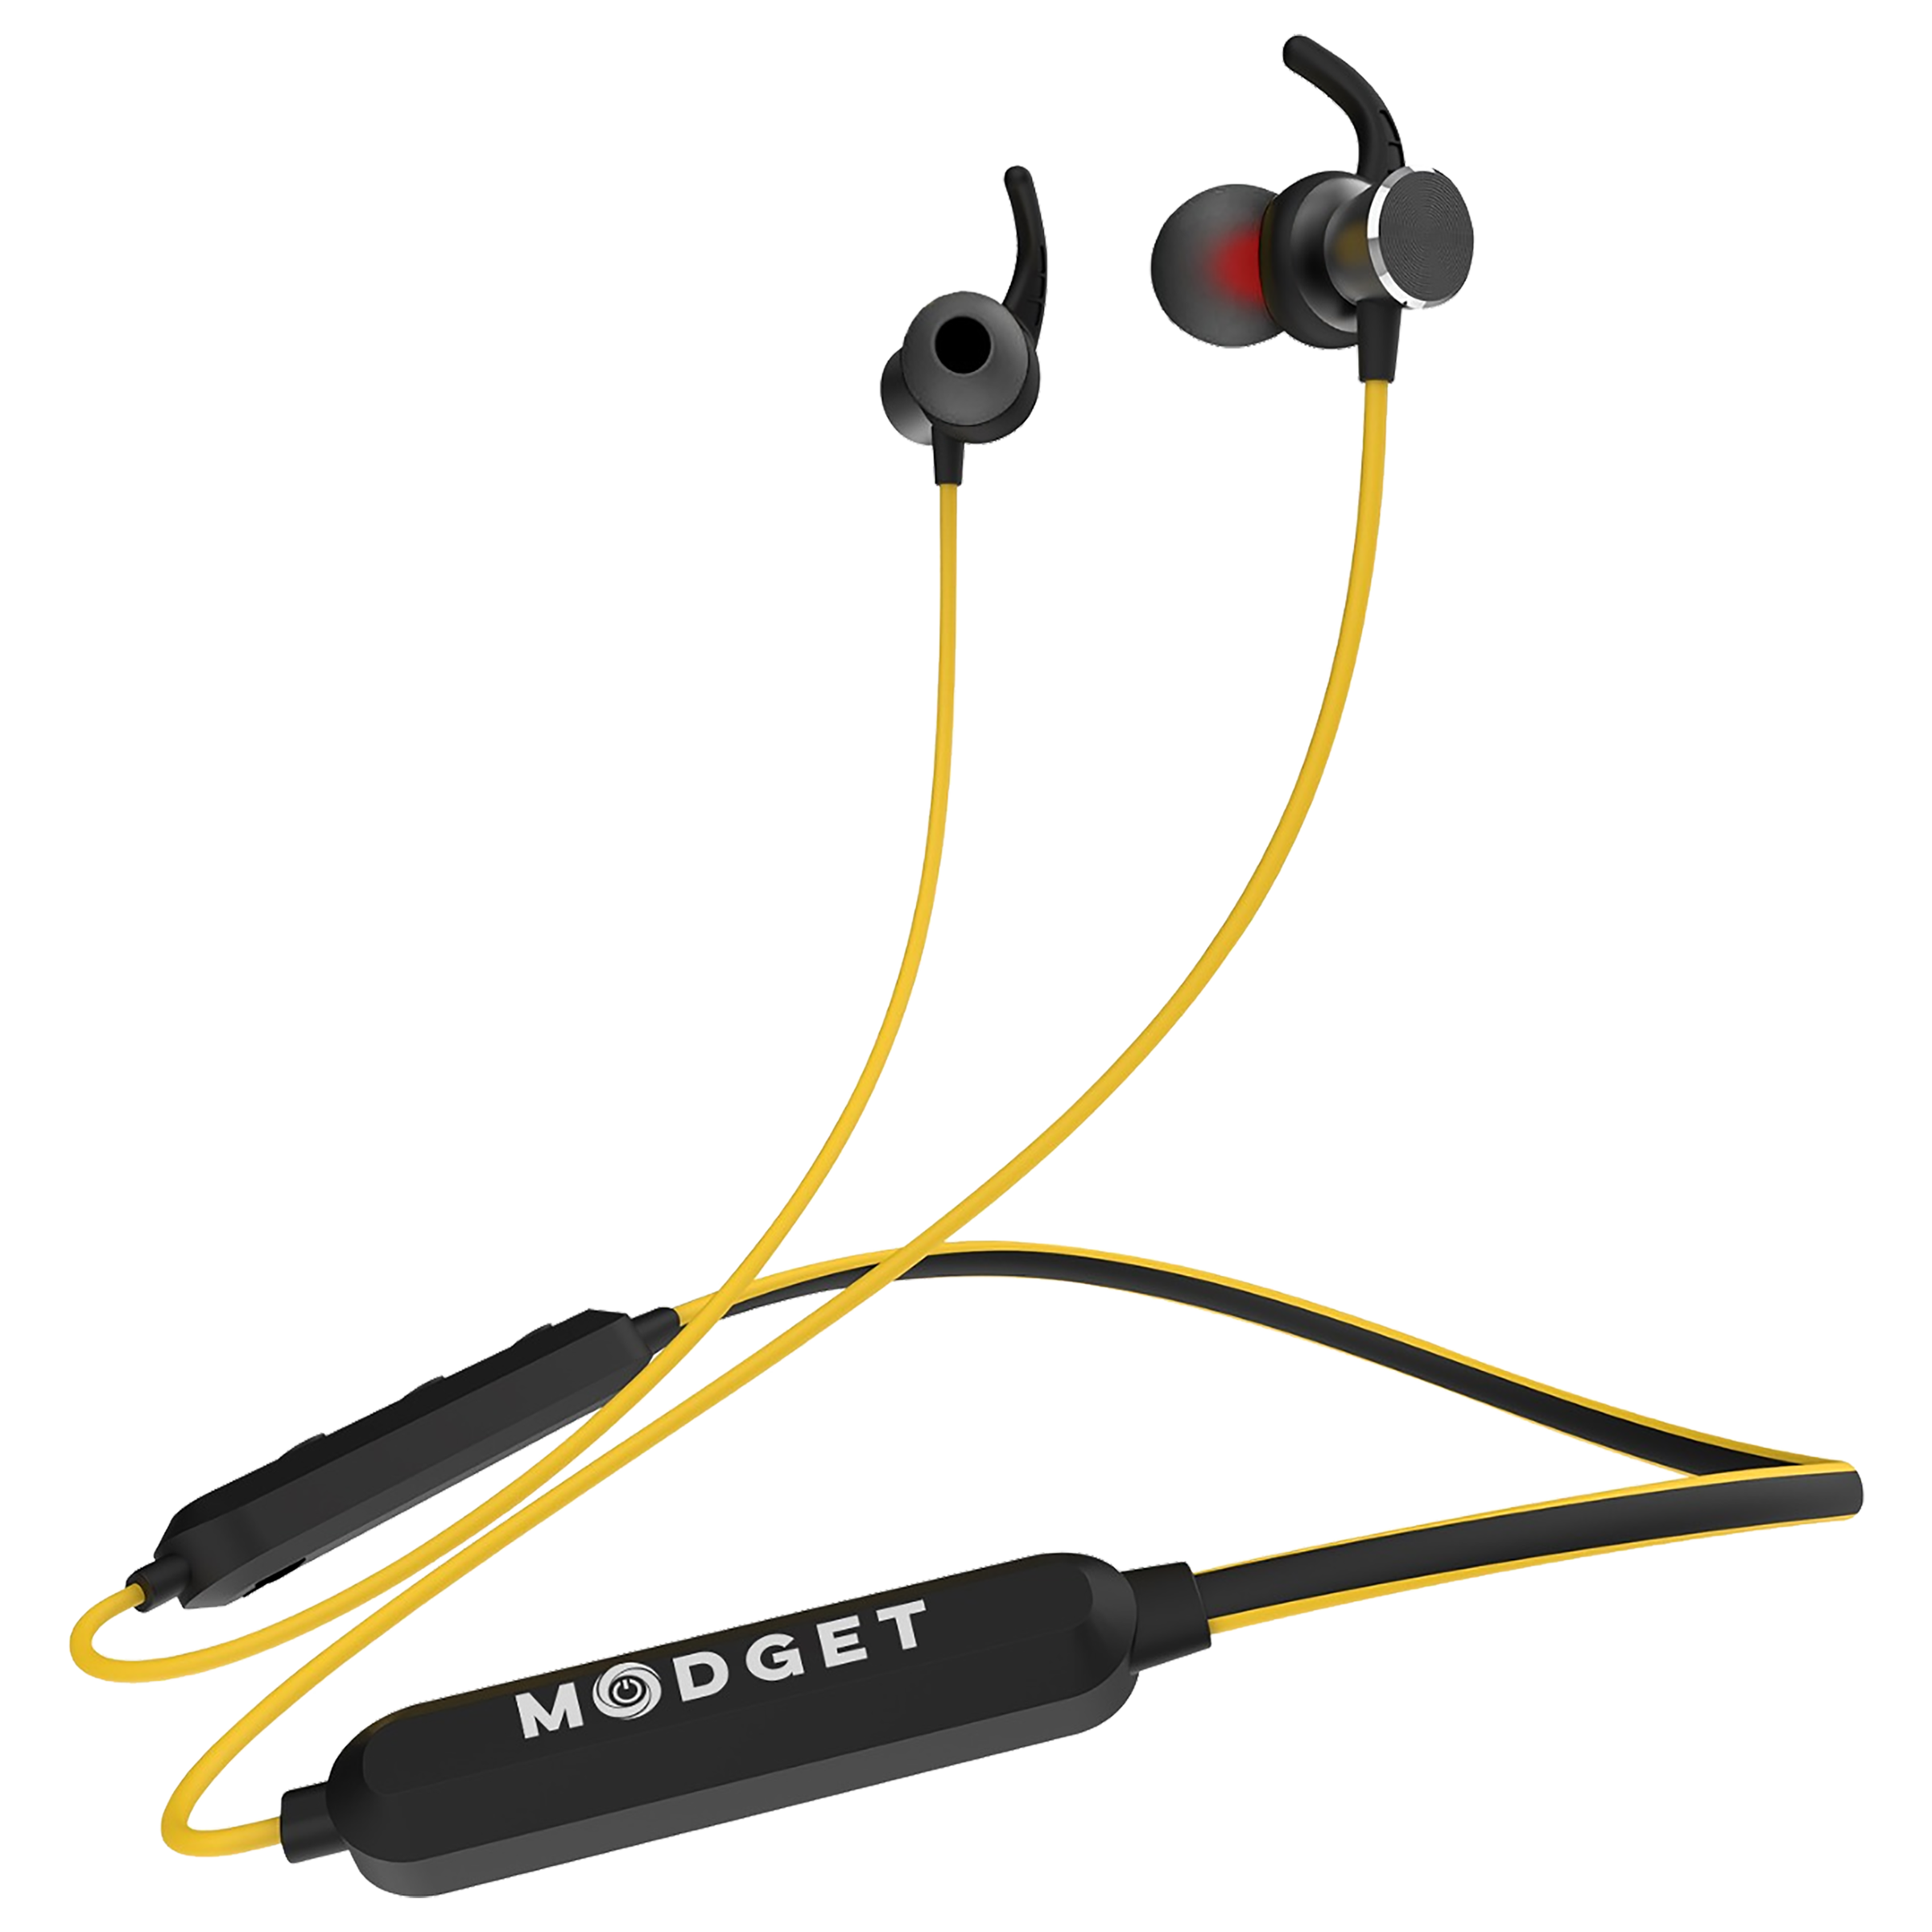 Modget PowerBuds In-Ear H36-BLK/YLOW Active Noise Cancellation Wireless Earphone with Mic (Bluetooth 5.0, IPX5 Sweat Resistant, Yellow/Black)_1